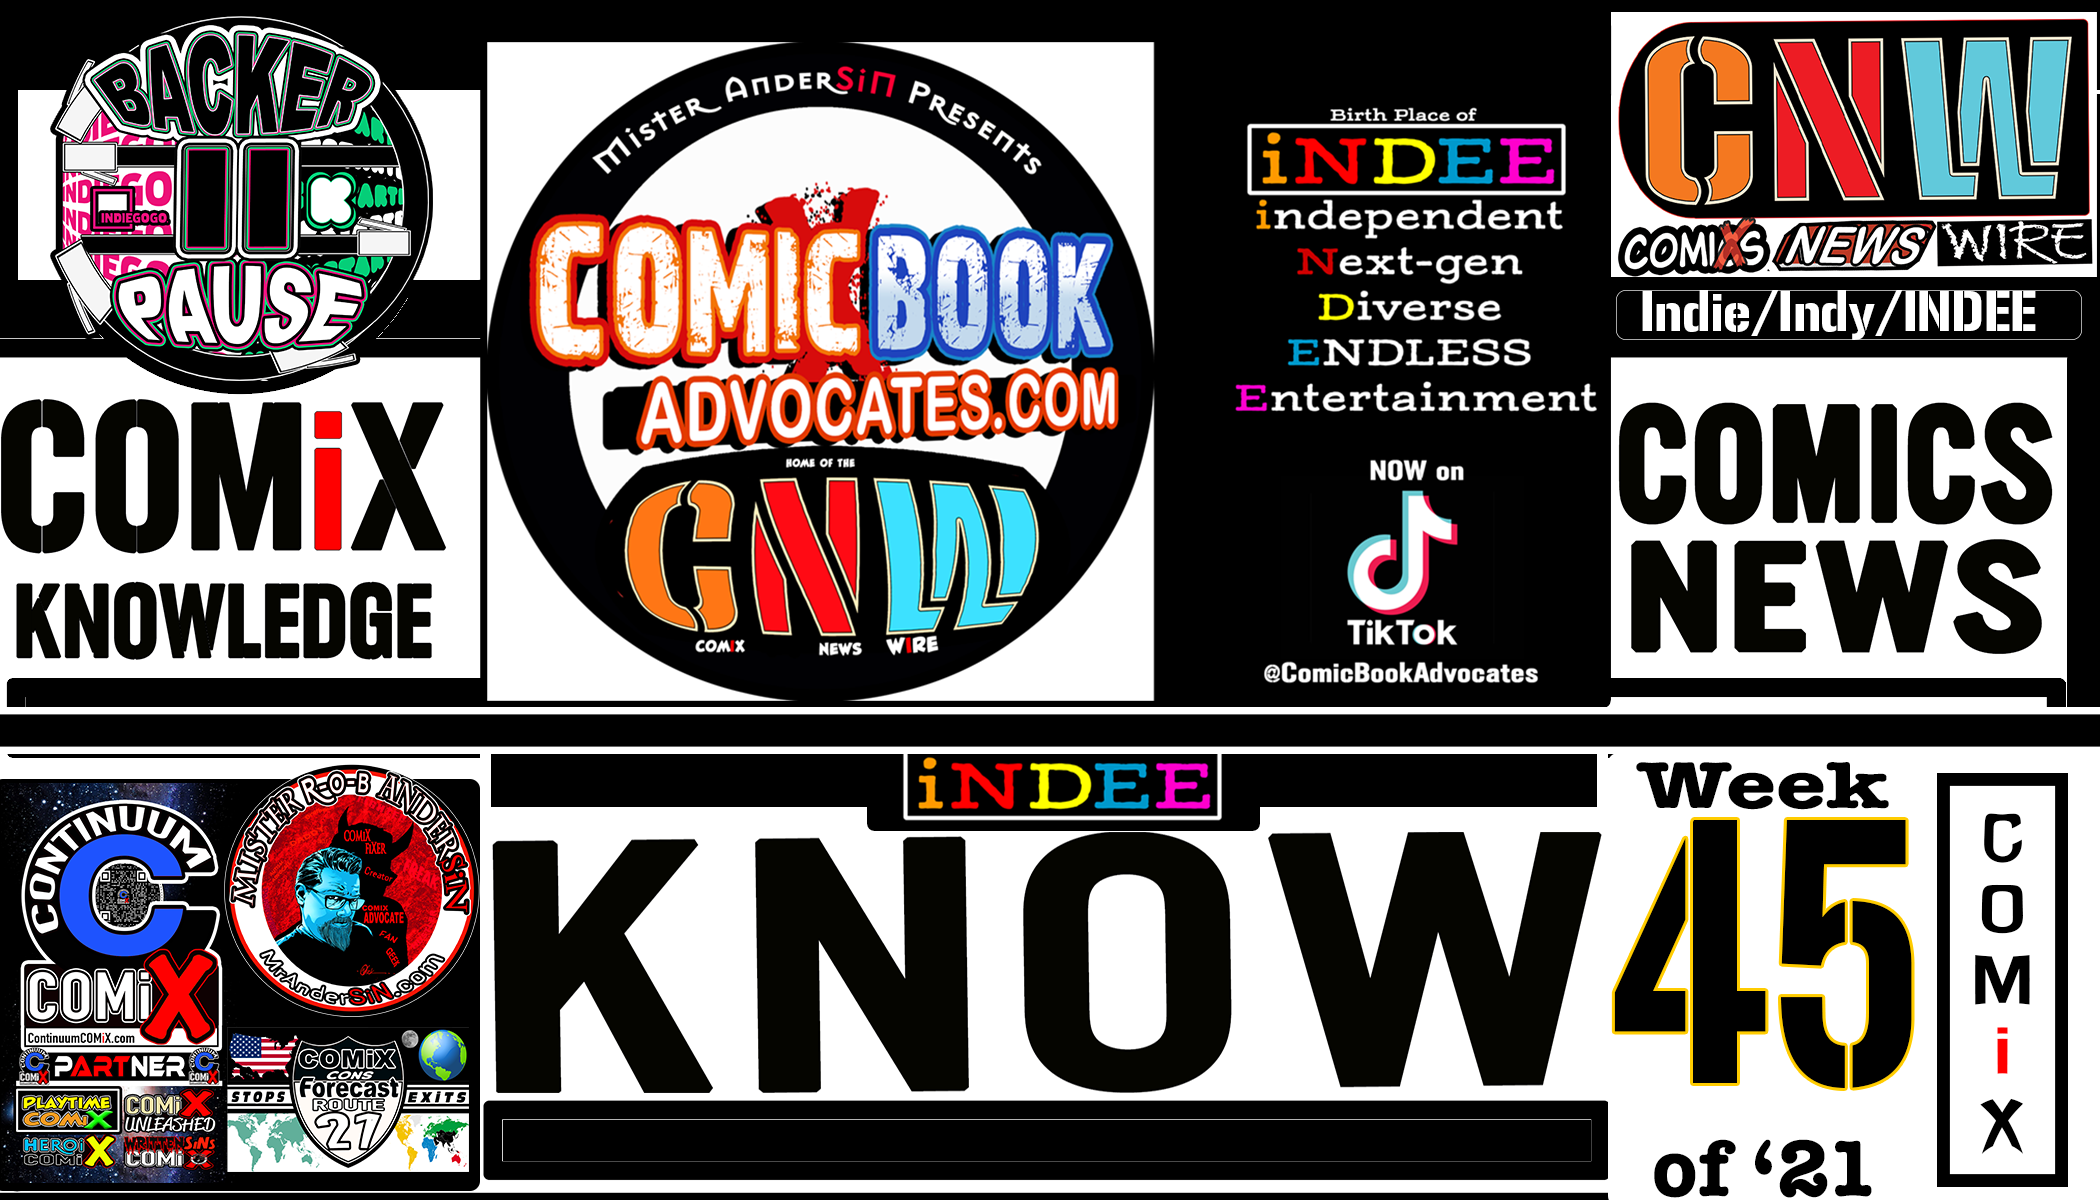 Week 45 of ’21-This Week in INDEE part of  THE COMiX NEWS WiRE.